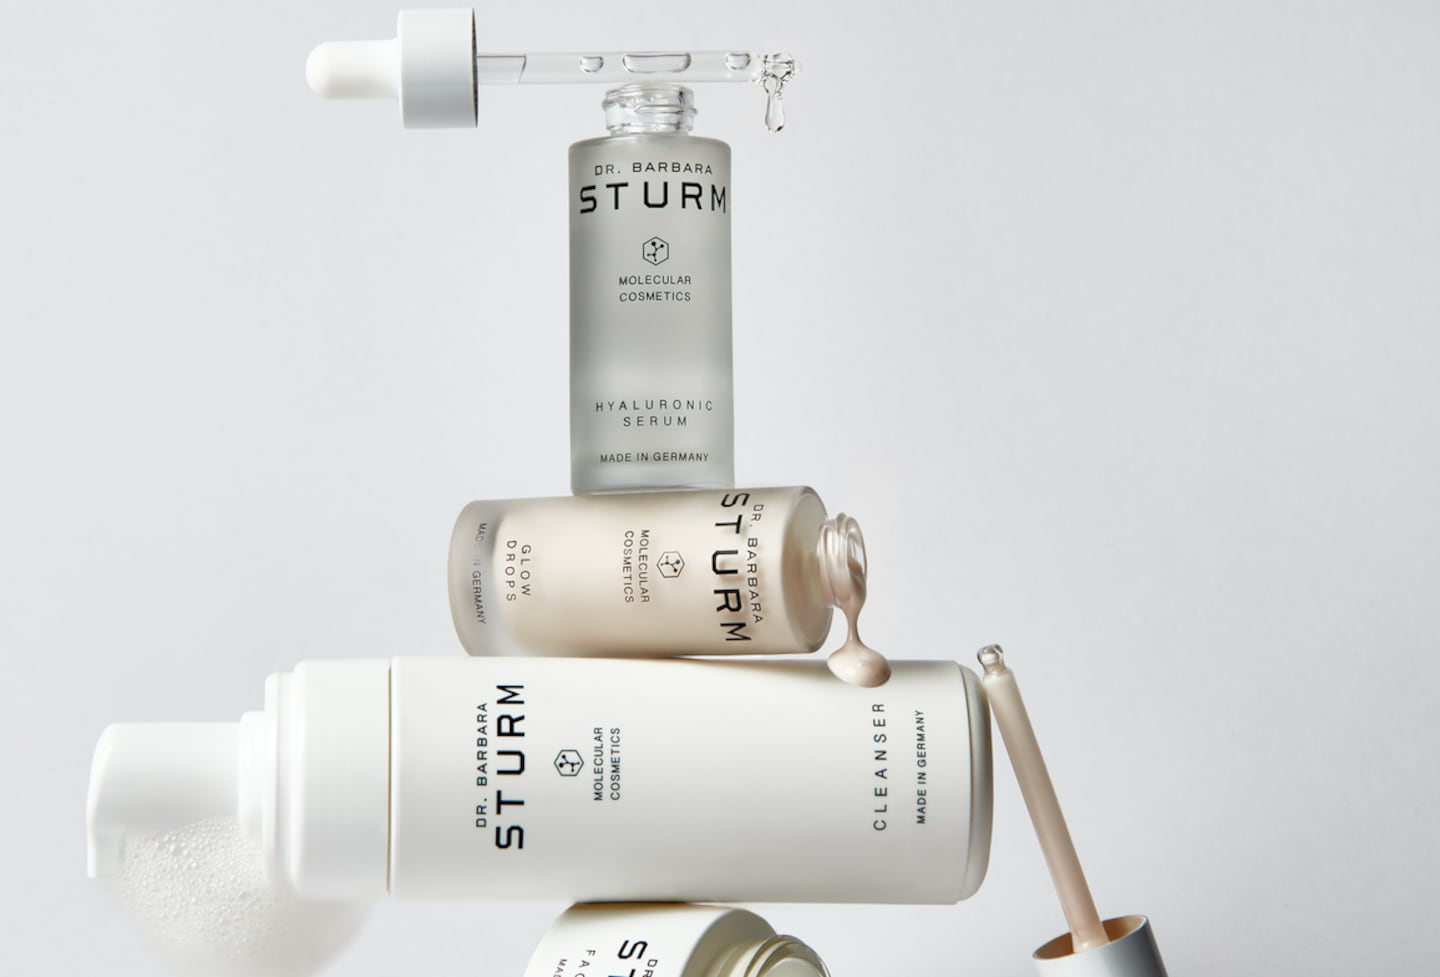 An image of Dr Barbara Sturm skincare products.